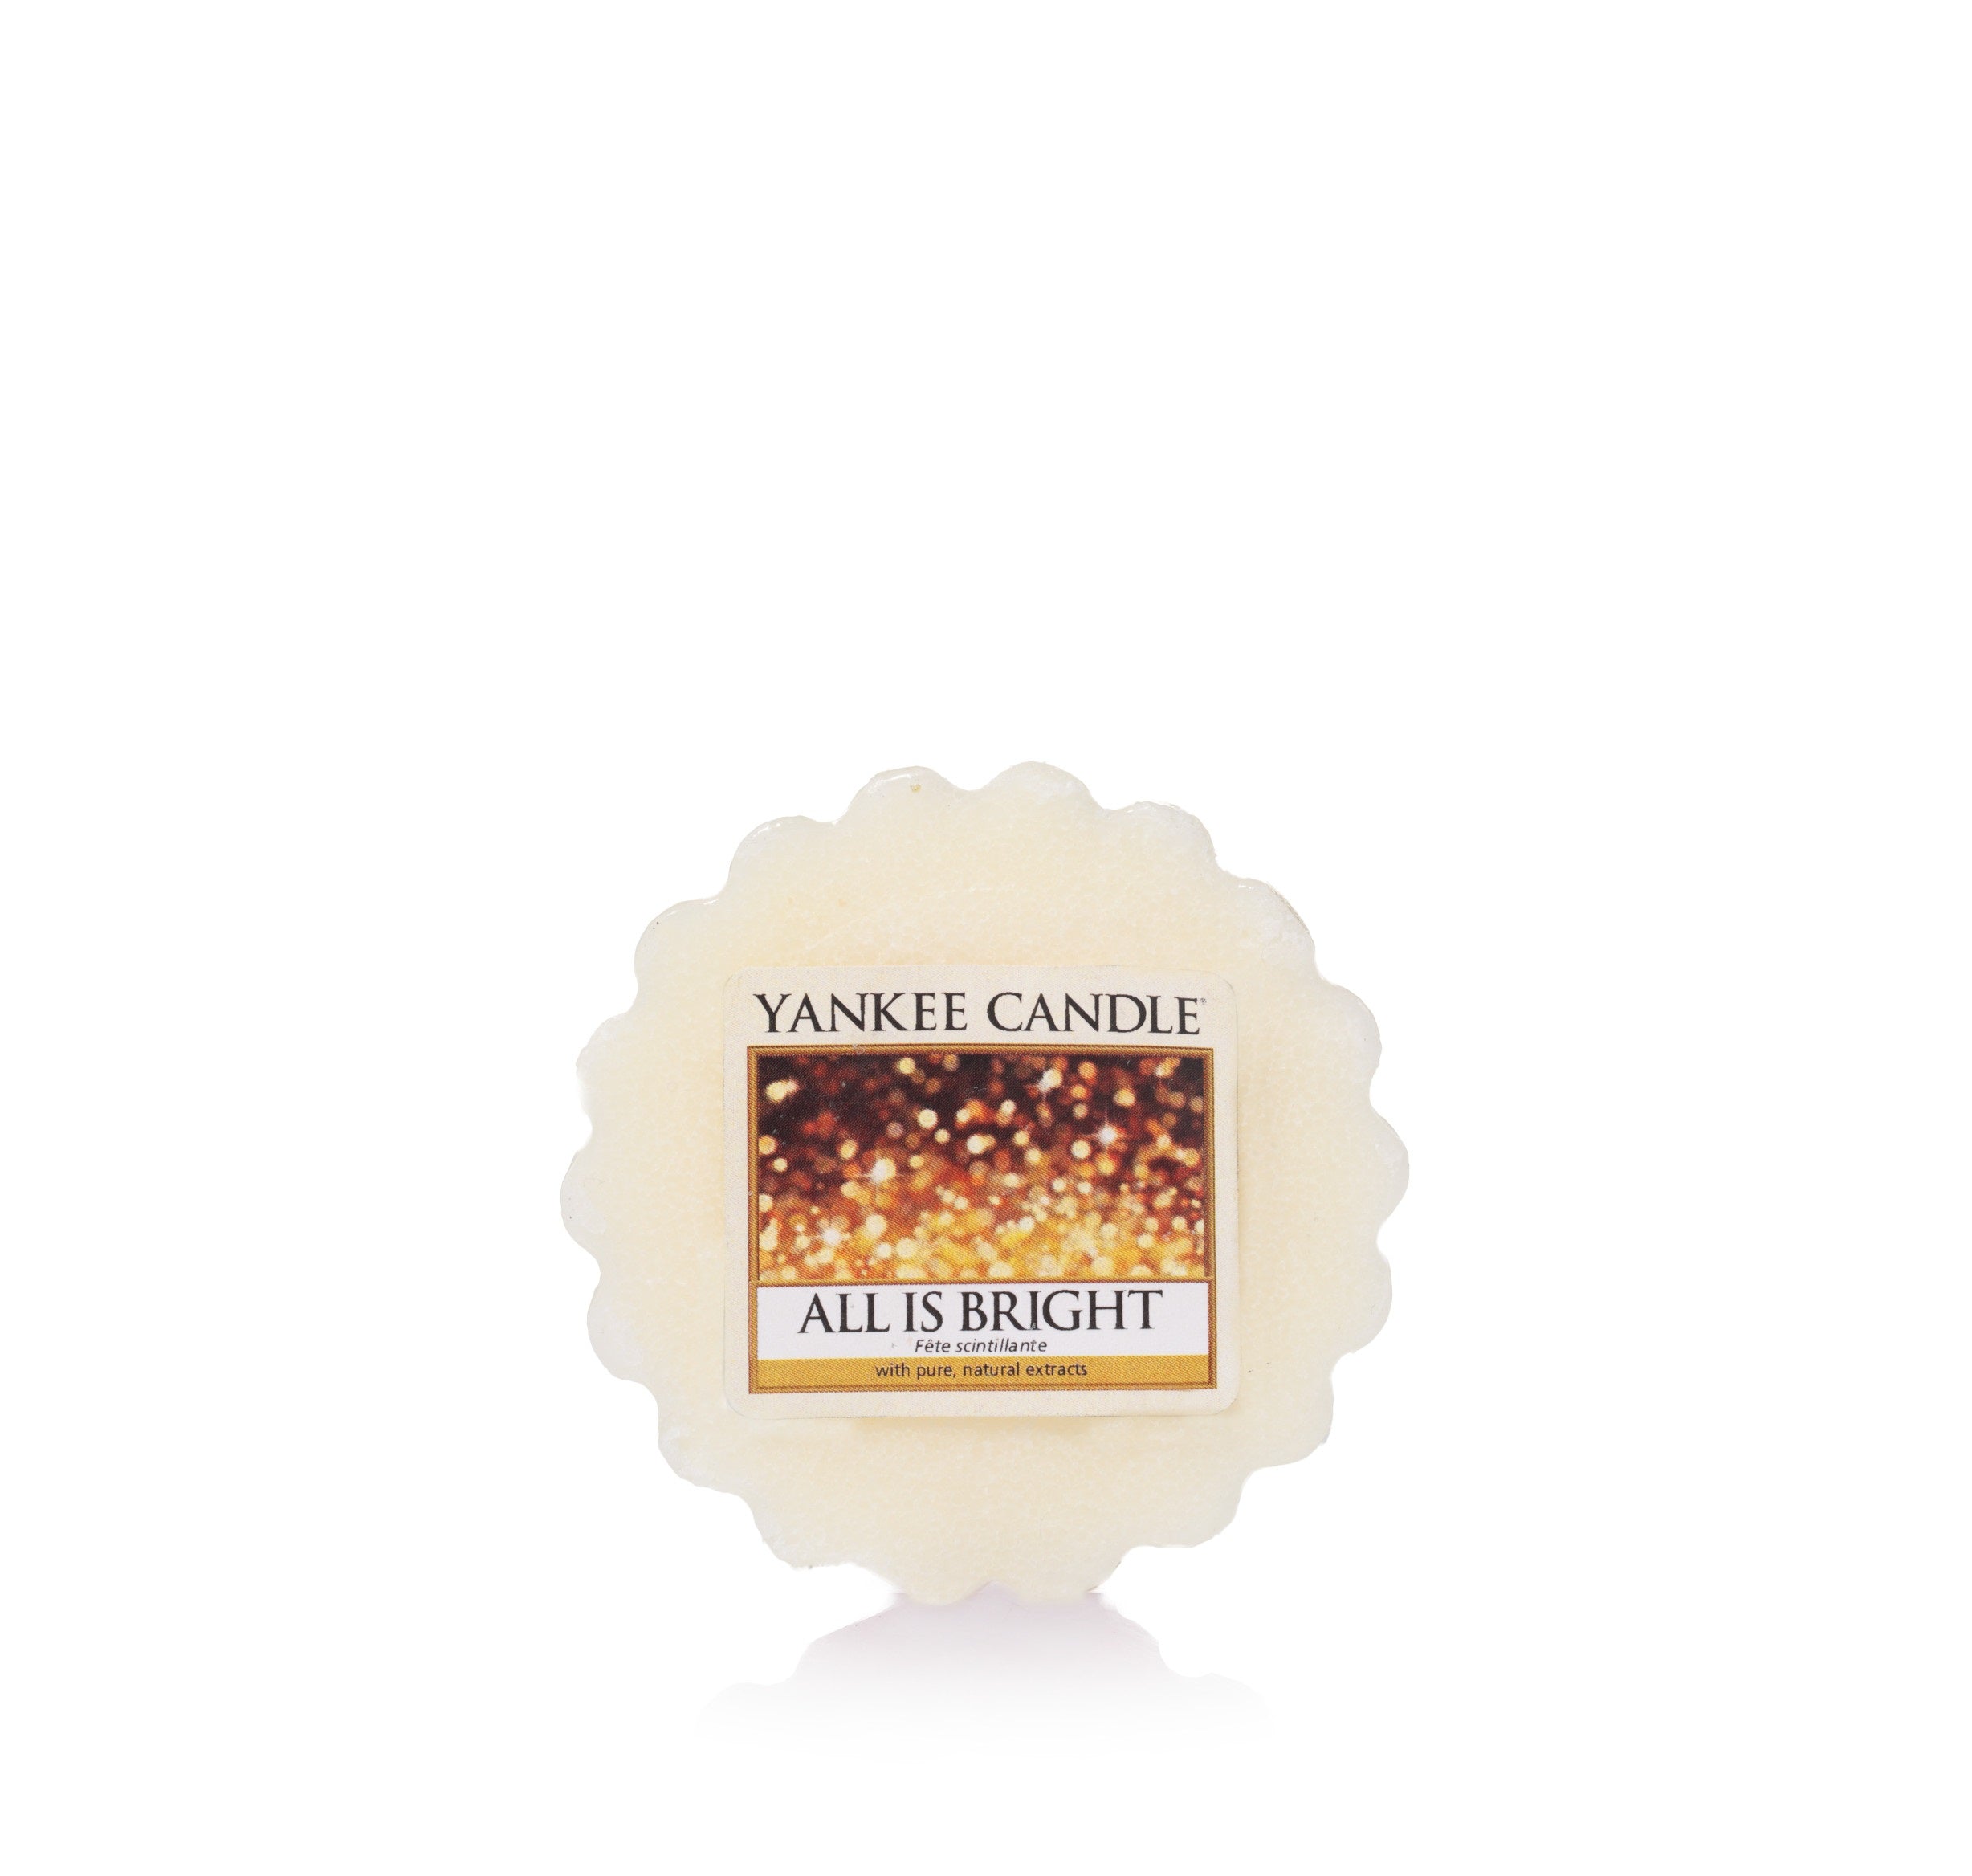 ALL IS BRIGHT -Yankee Candle- Tart